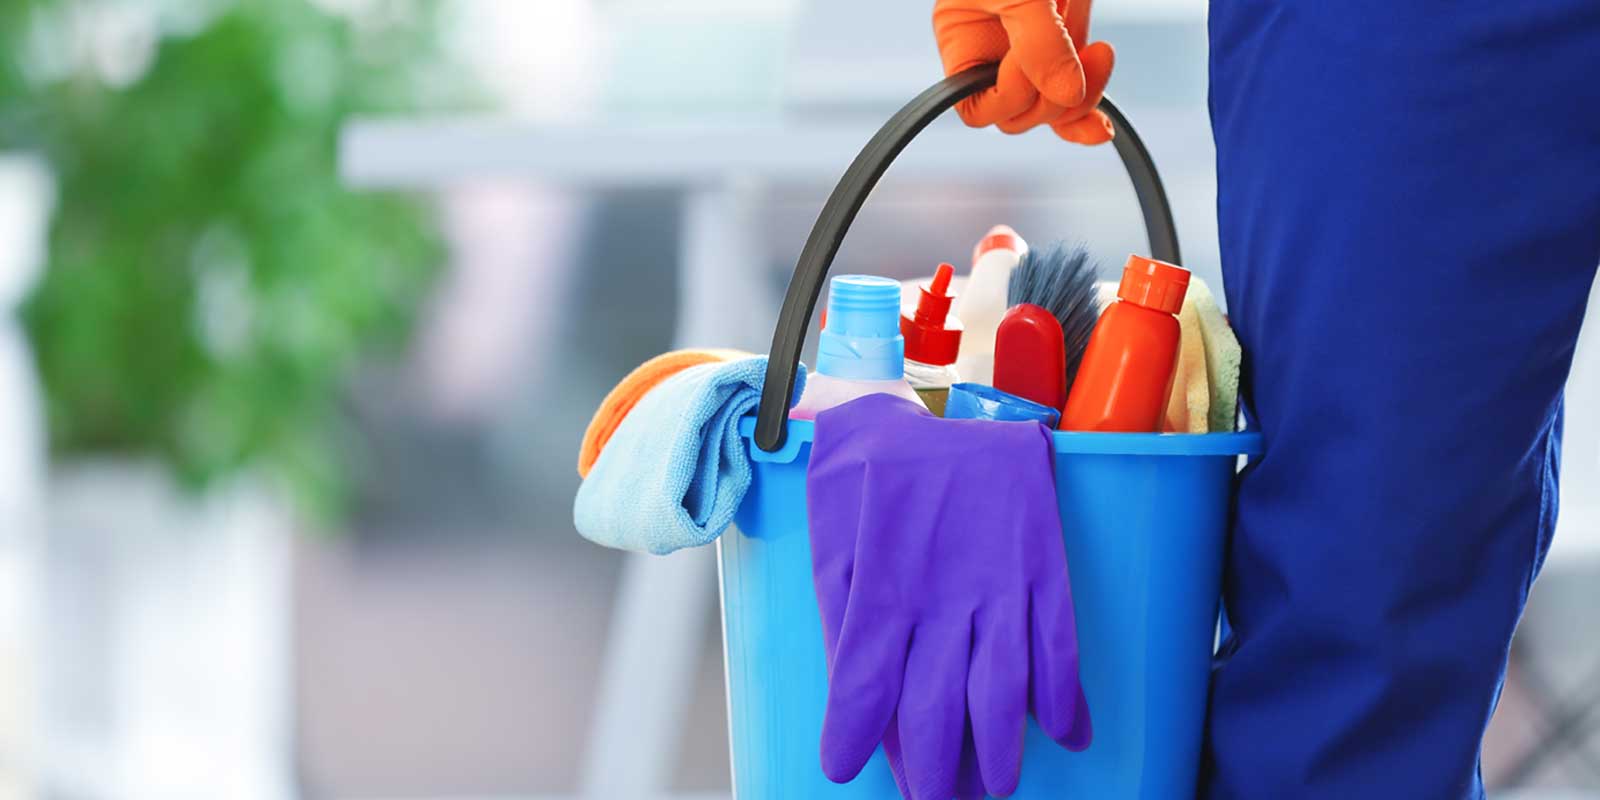 Are Your Cleaning Products Damaging Your Health?